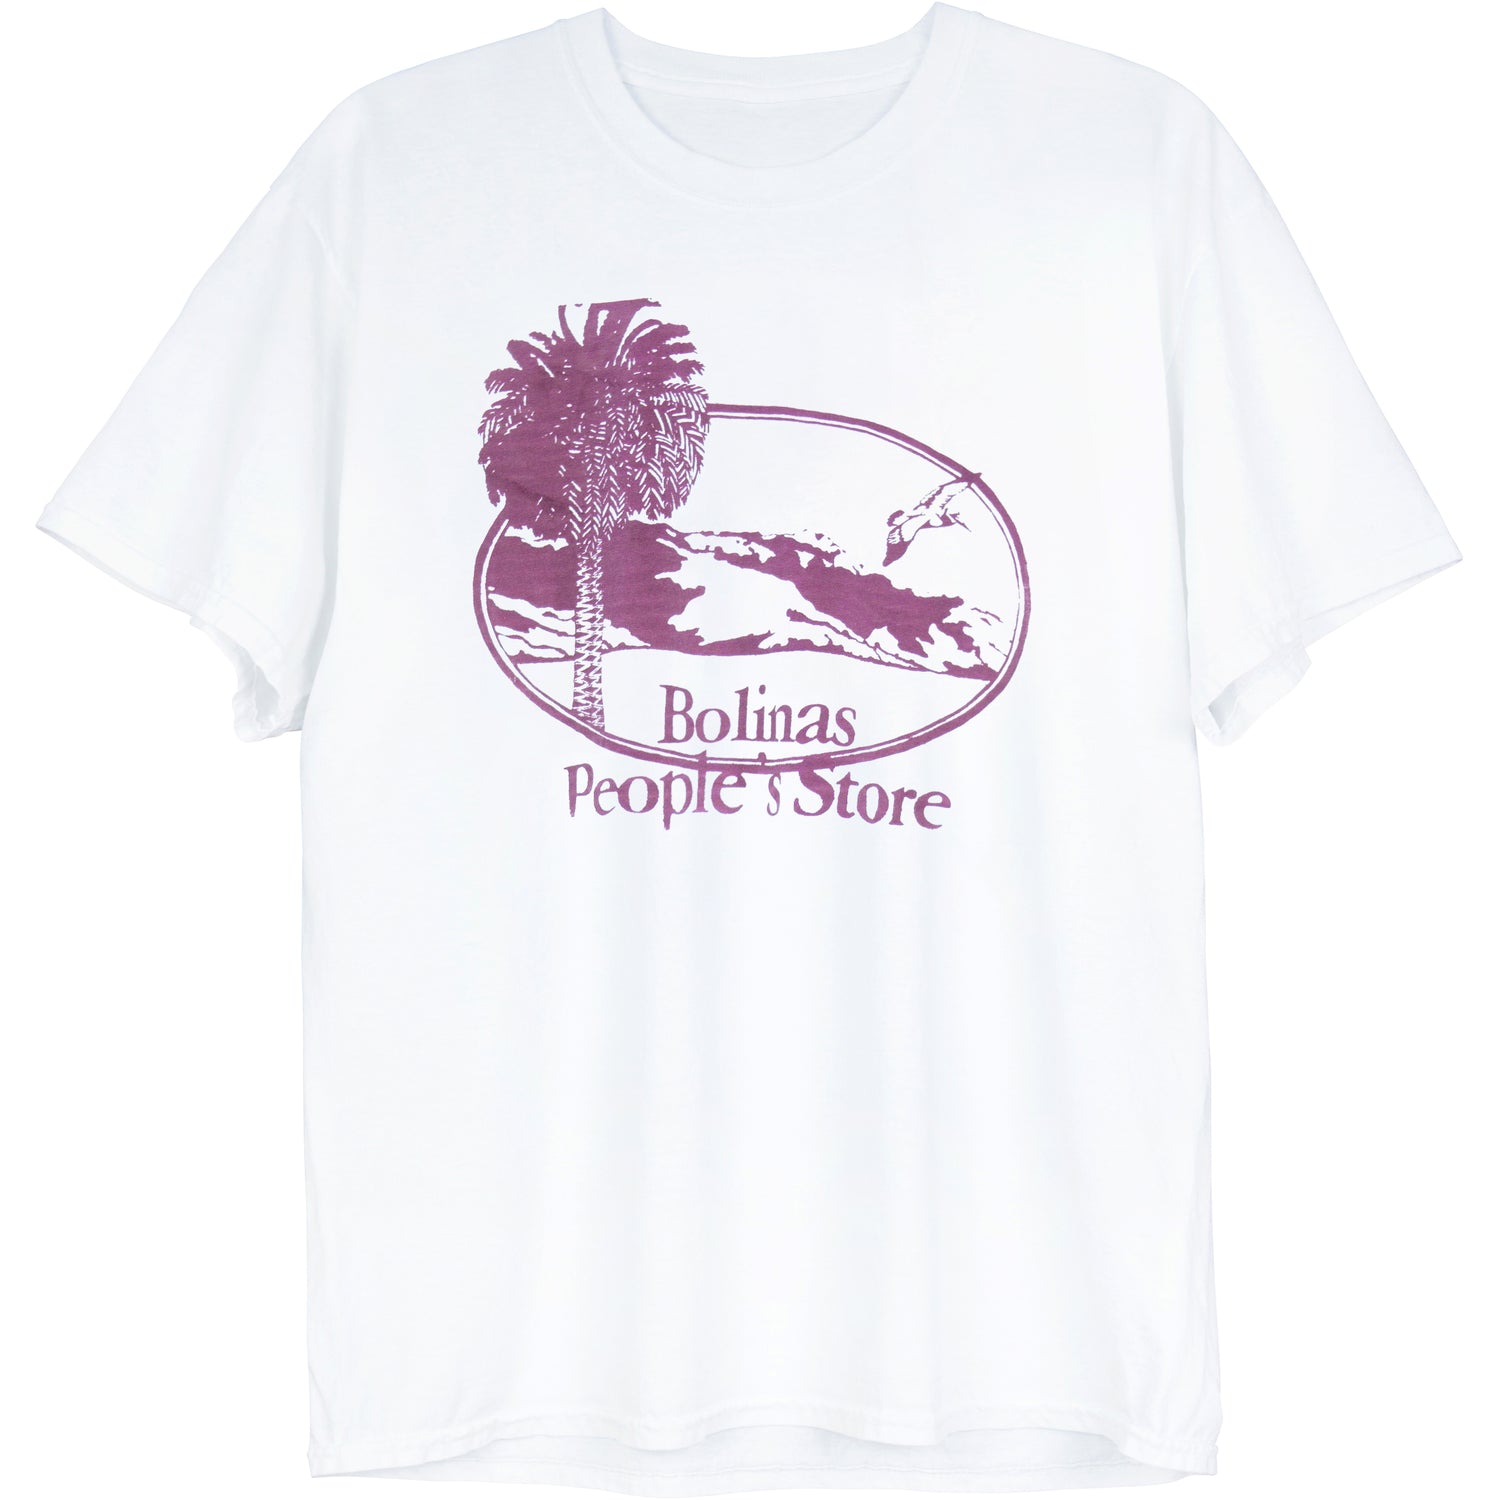 BOLINAS PEOPLE'S STORE T-SHIRT